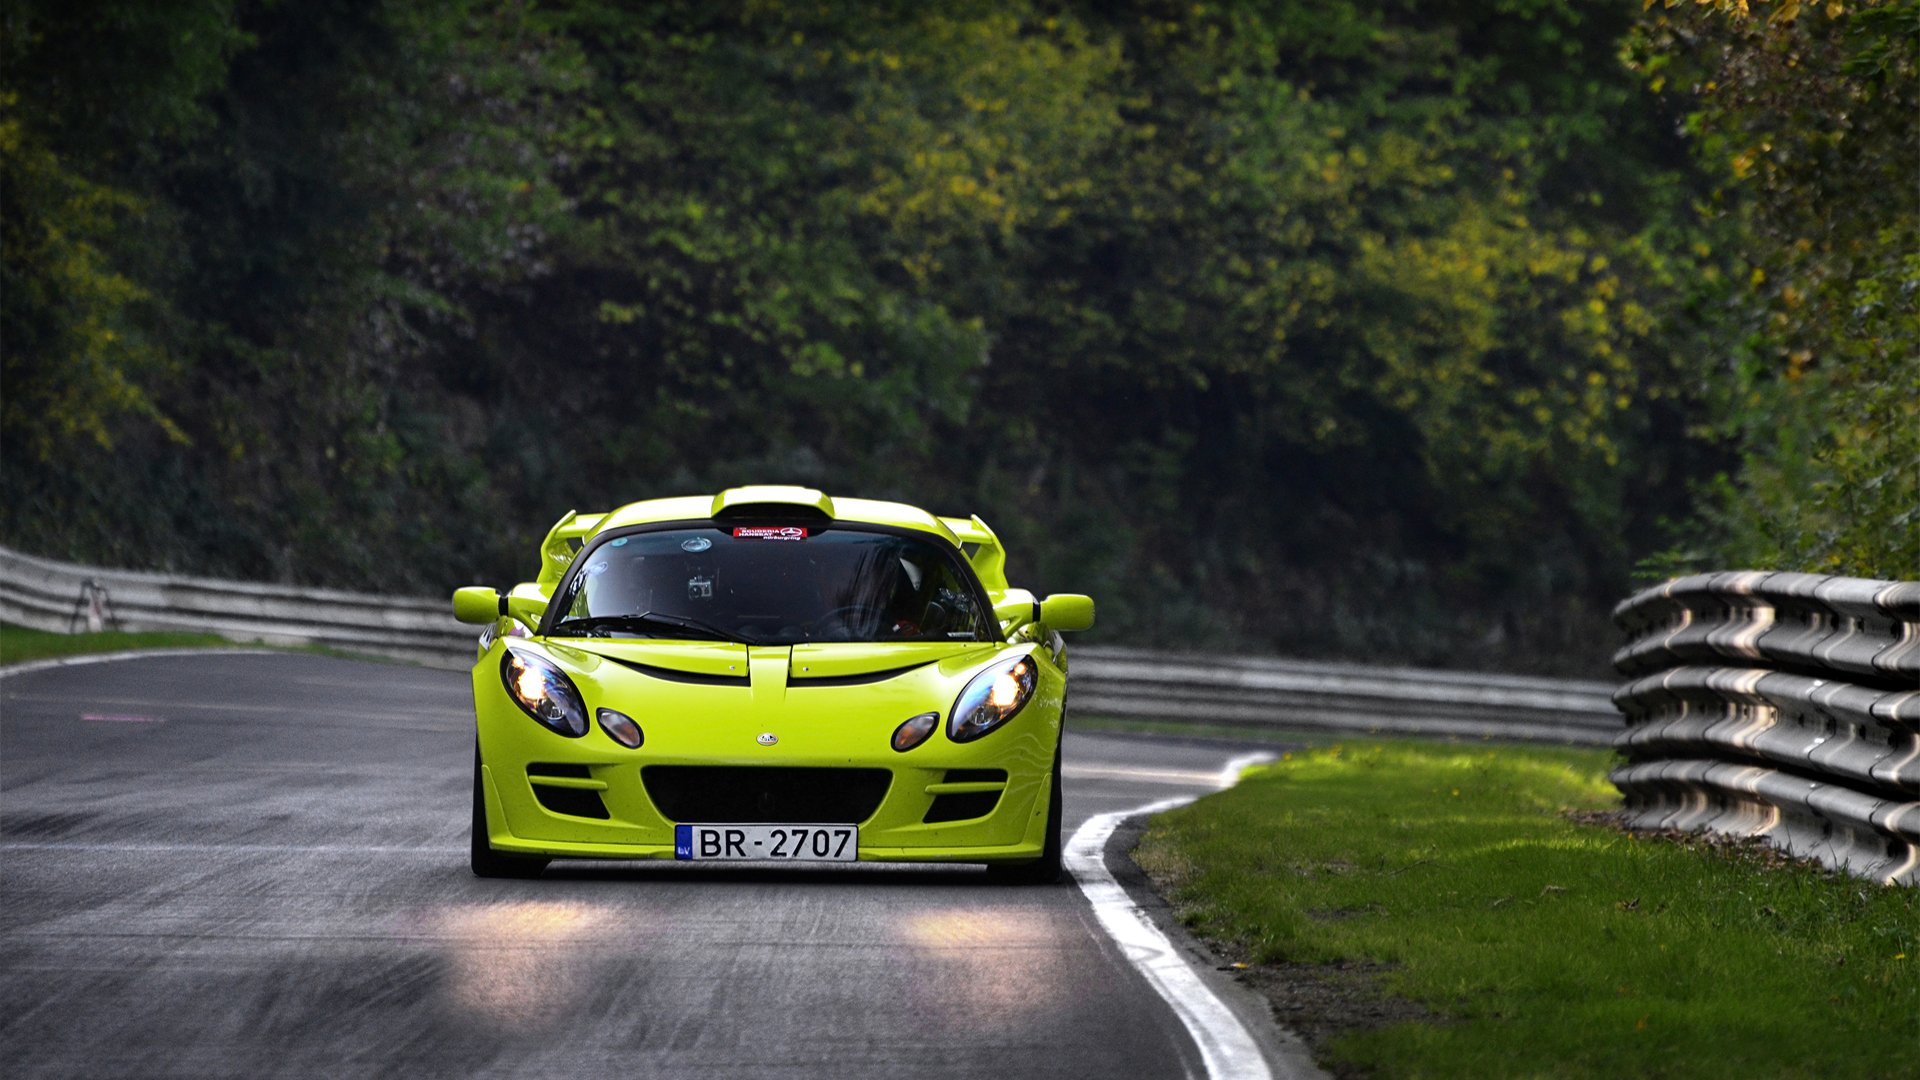 40+ Lotus Exige HD Wallpapers and Backgrounds